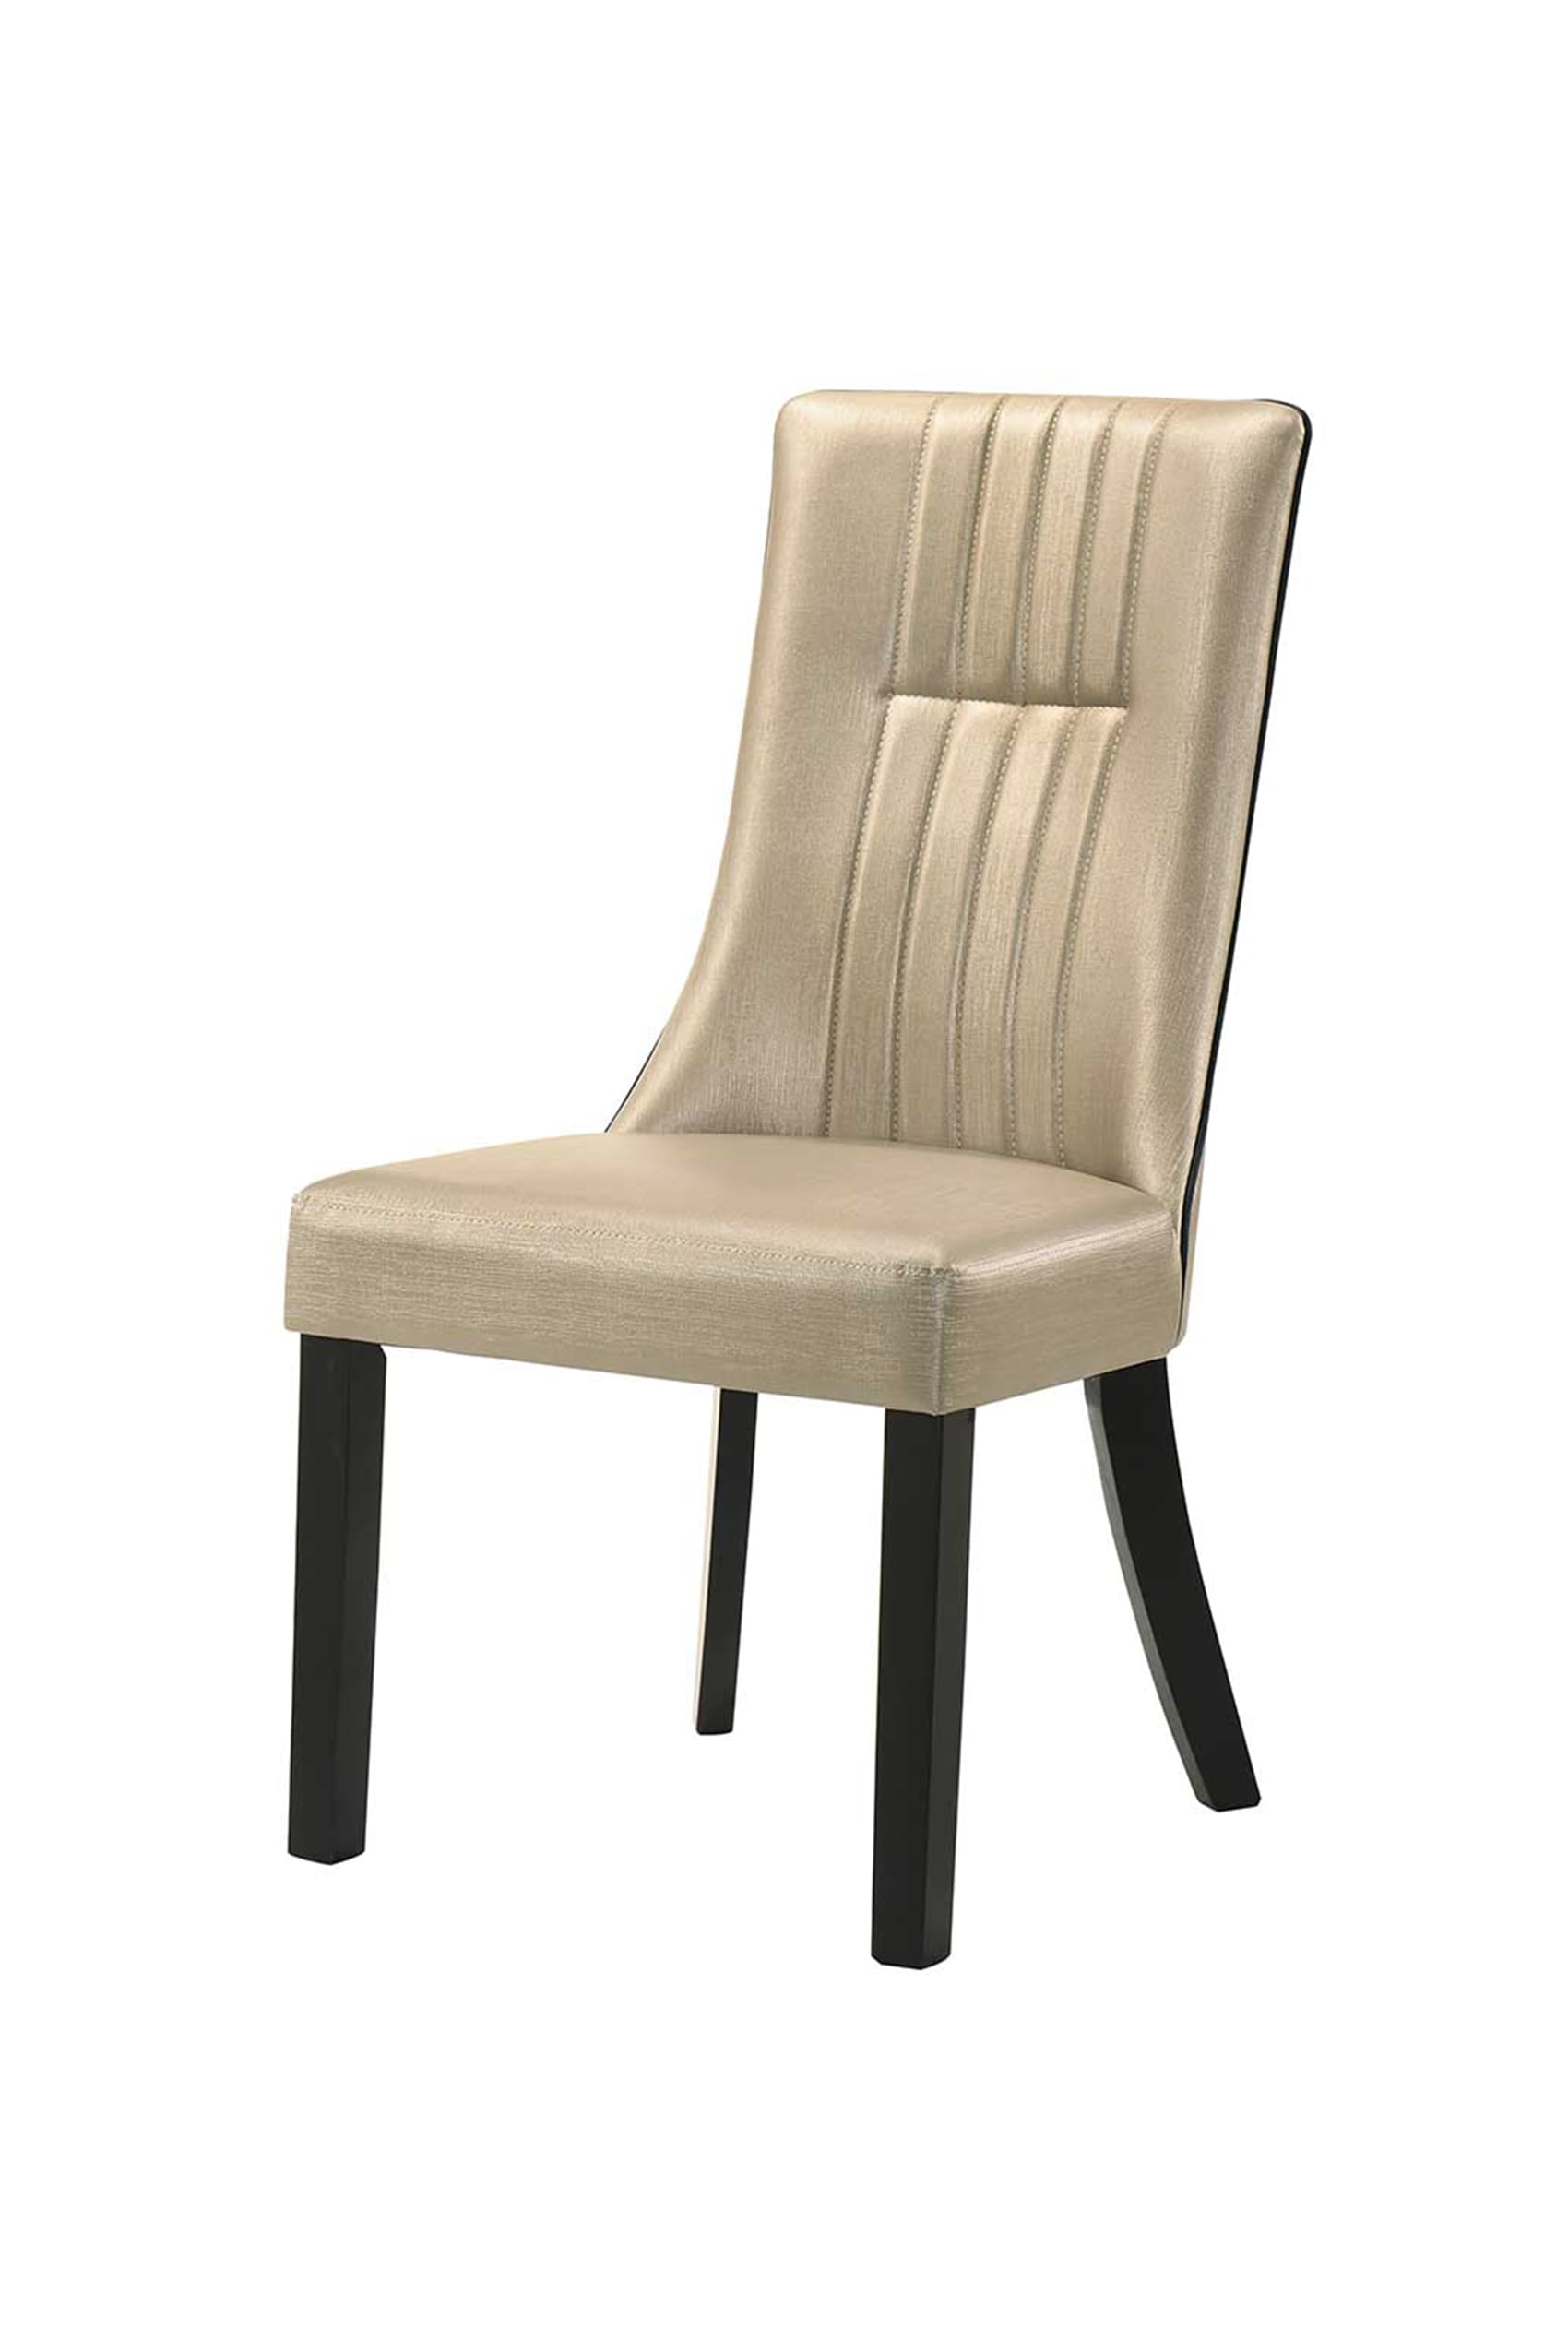 Naxos Leather Dining Chair